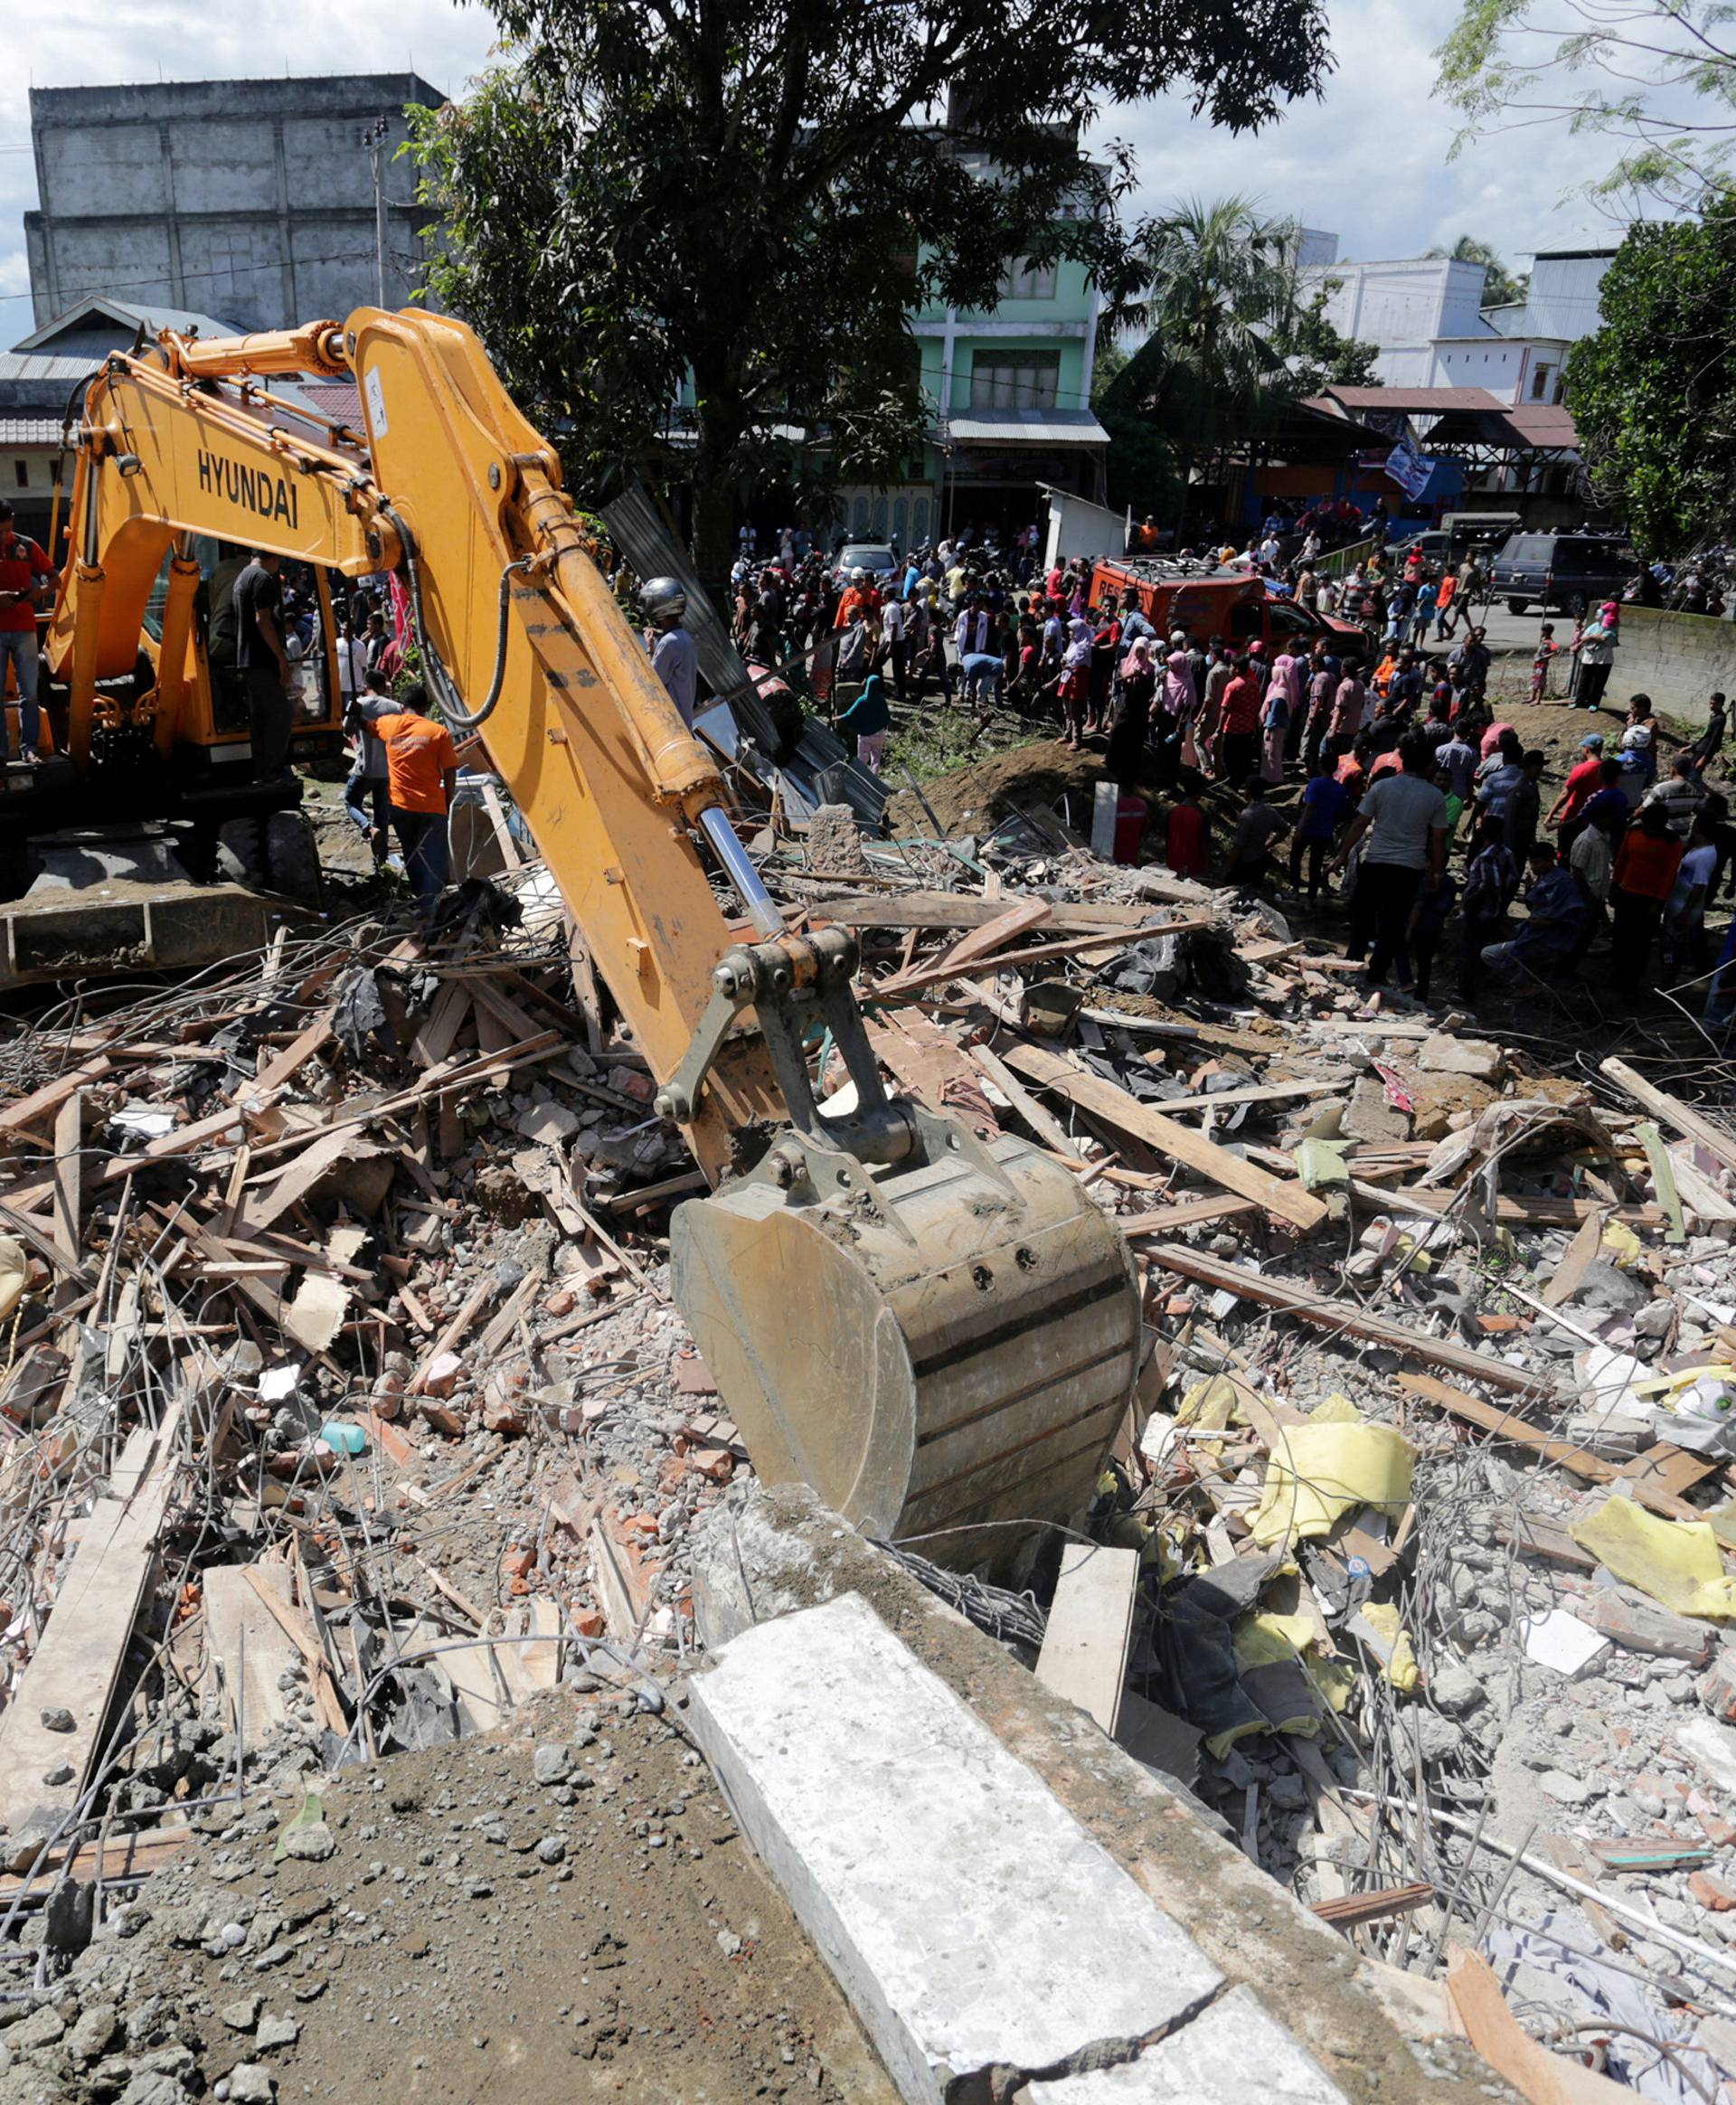 Rescue workers use heavy equipment to search for victims in a collapsed building following an earthquake in Lueng Putu, Pidie Jaya in the northern province of Aceh, Indonesia